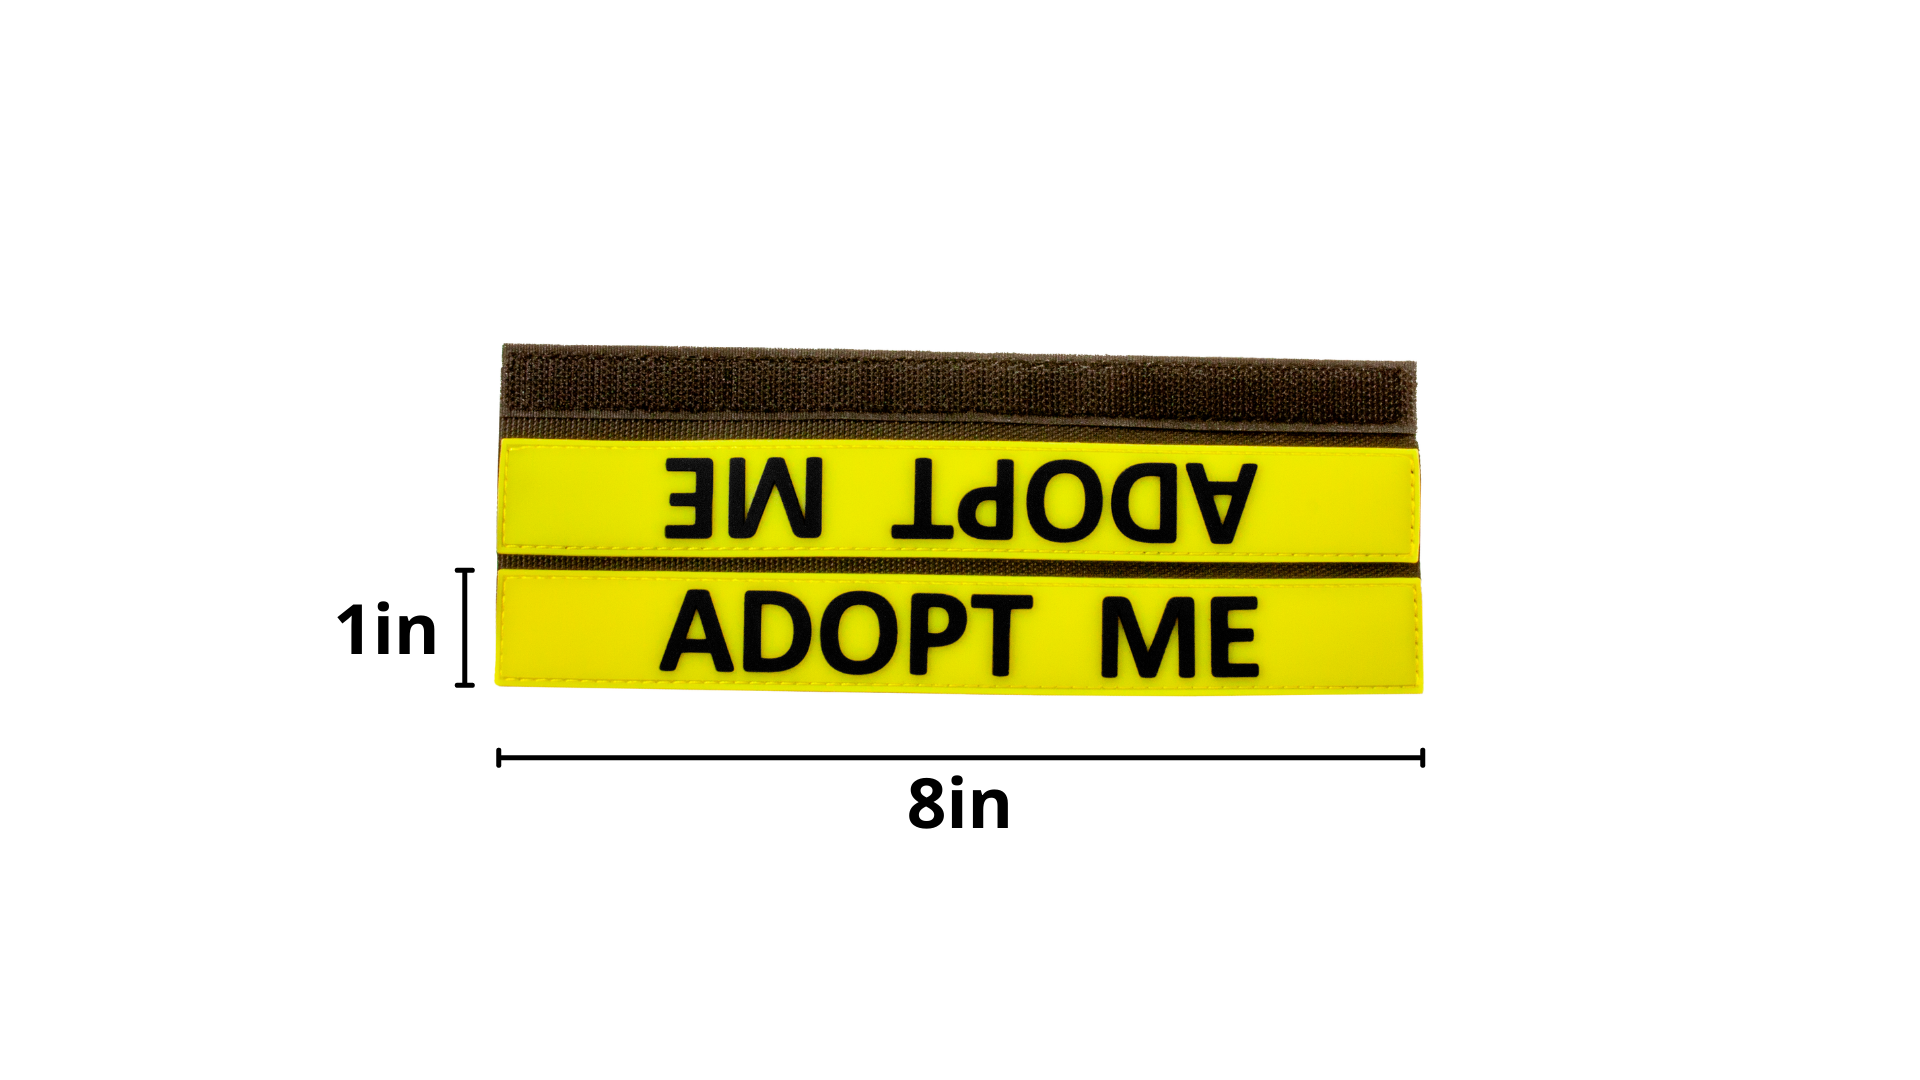 Adopt Me dog leash sleeve, working dogs, reactive dogs, training dogs, dogs that need space.